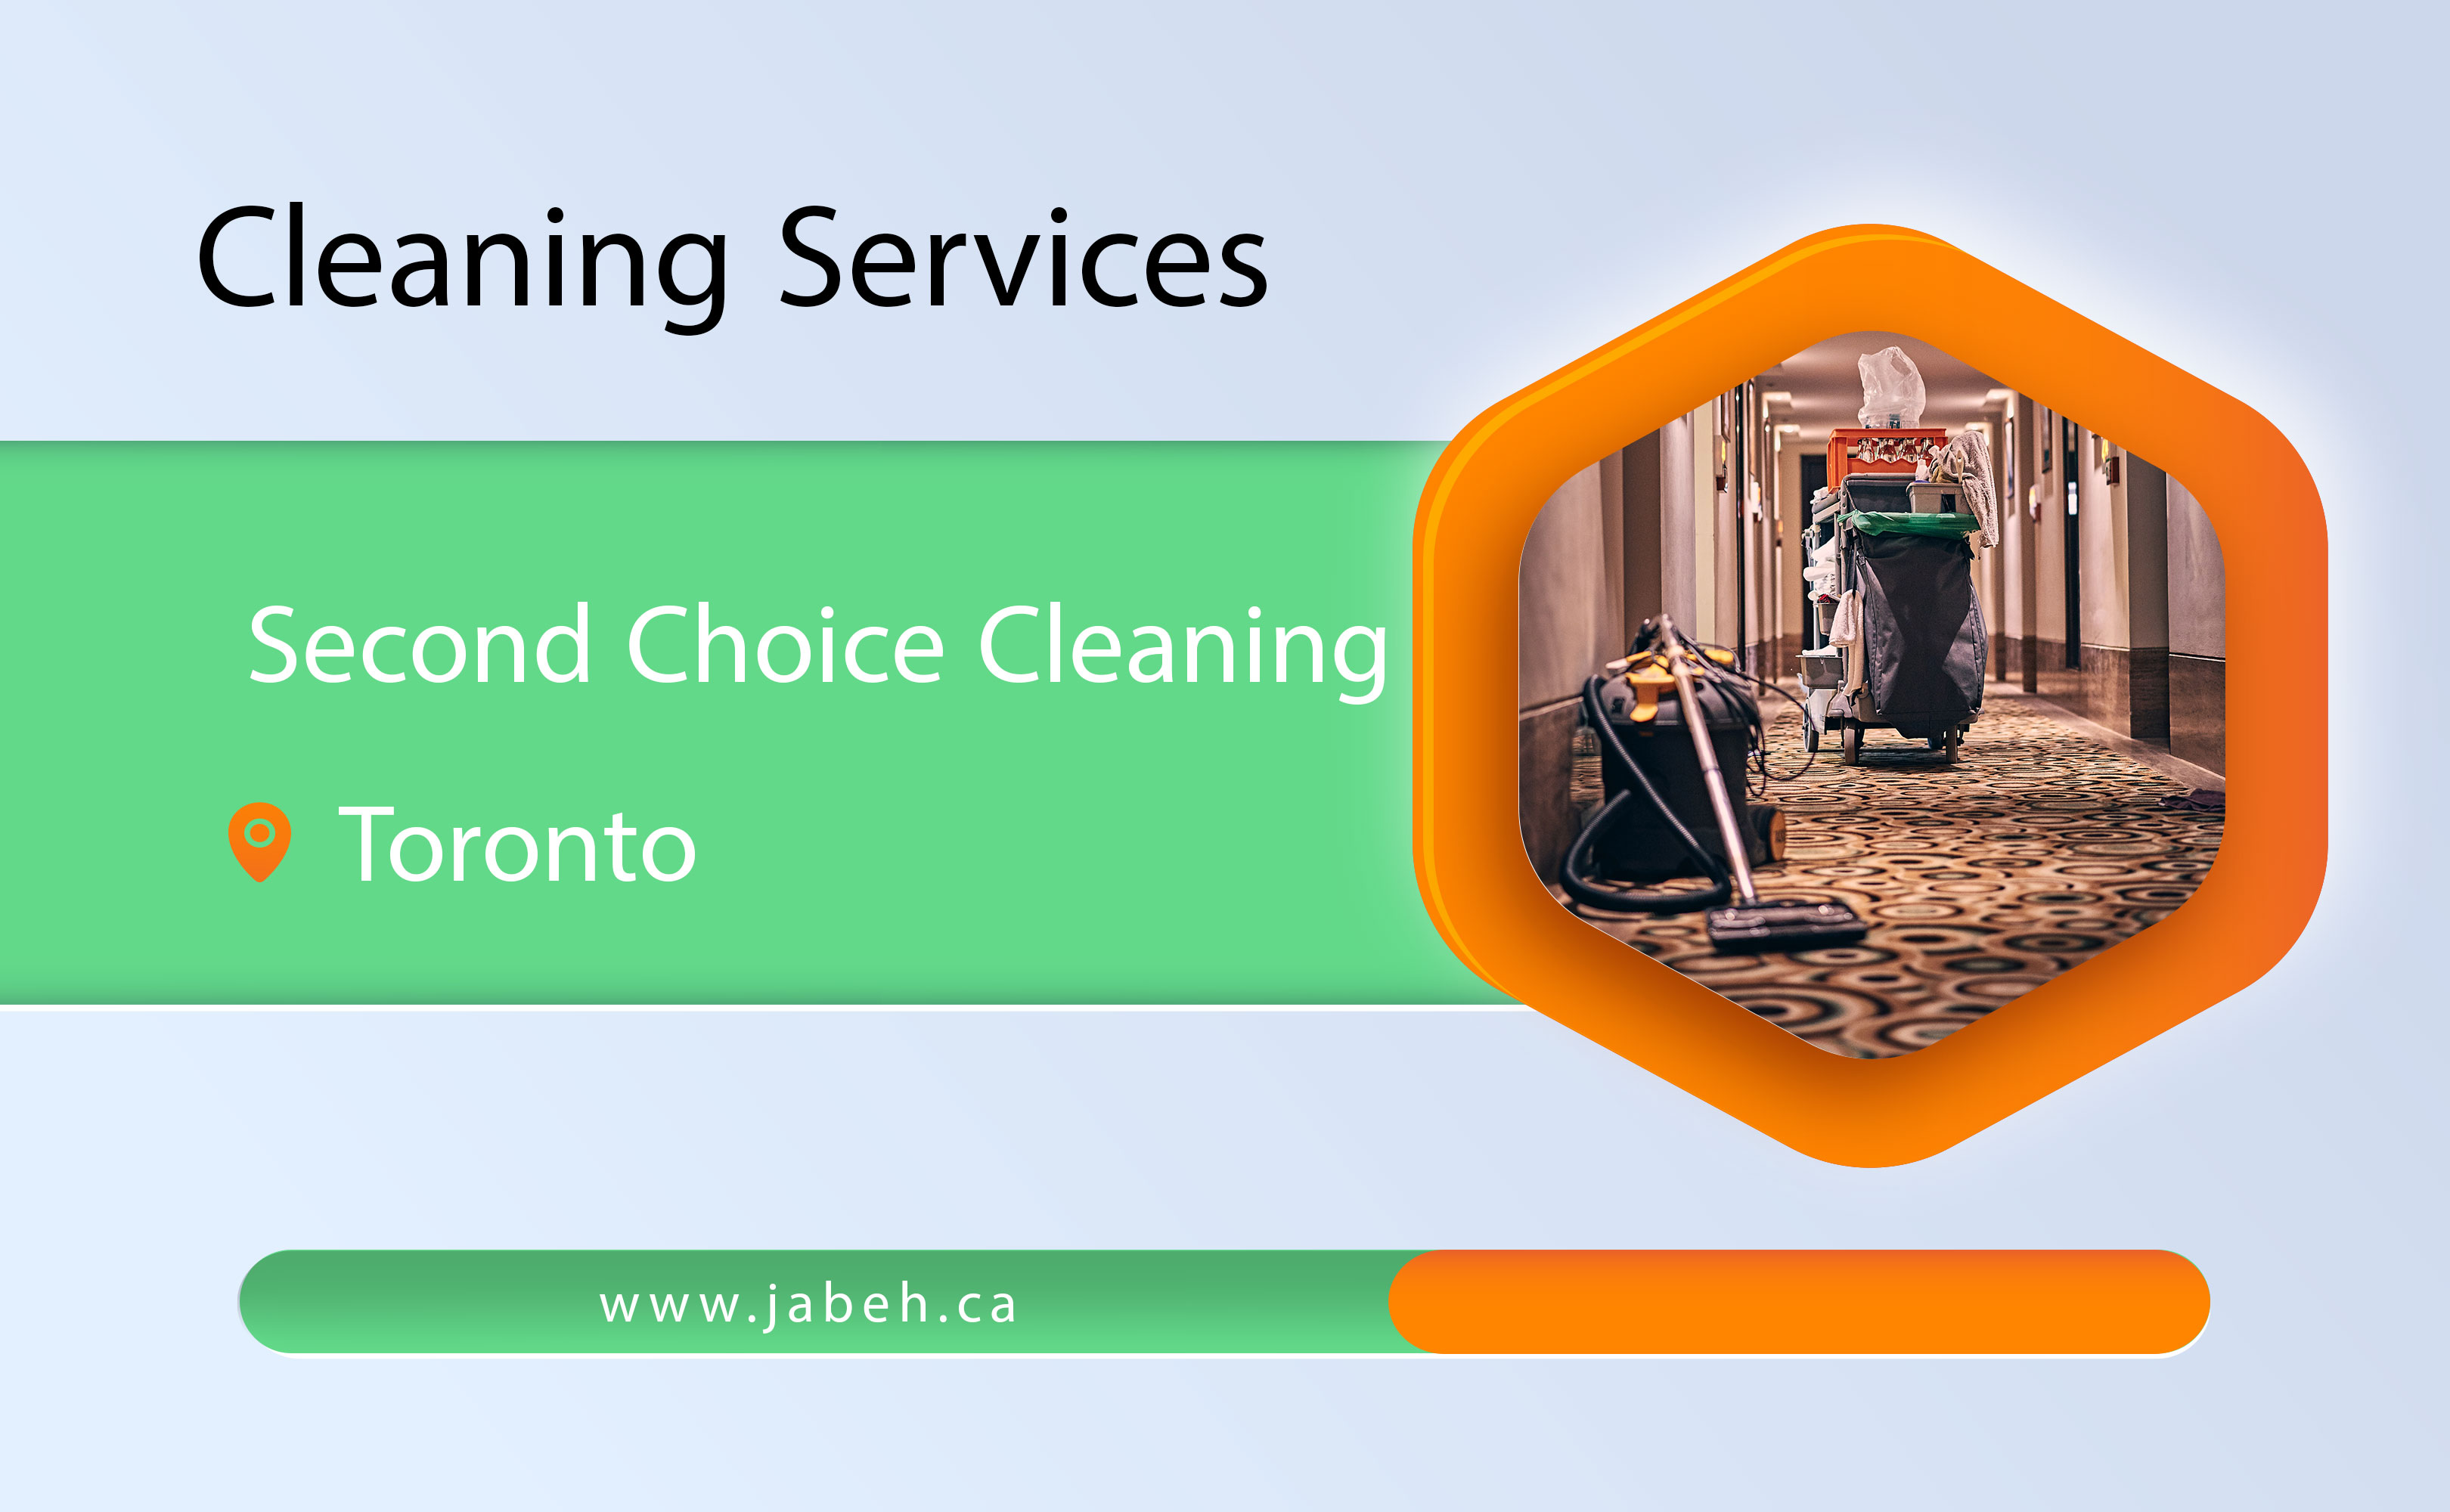 second choice cleaning services in Toronto